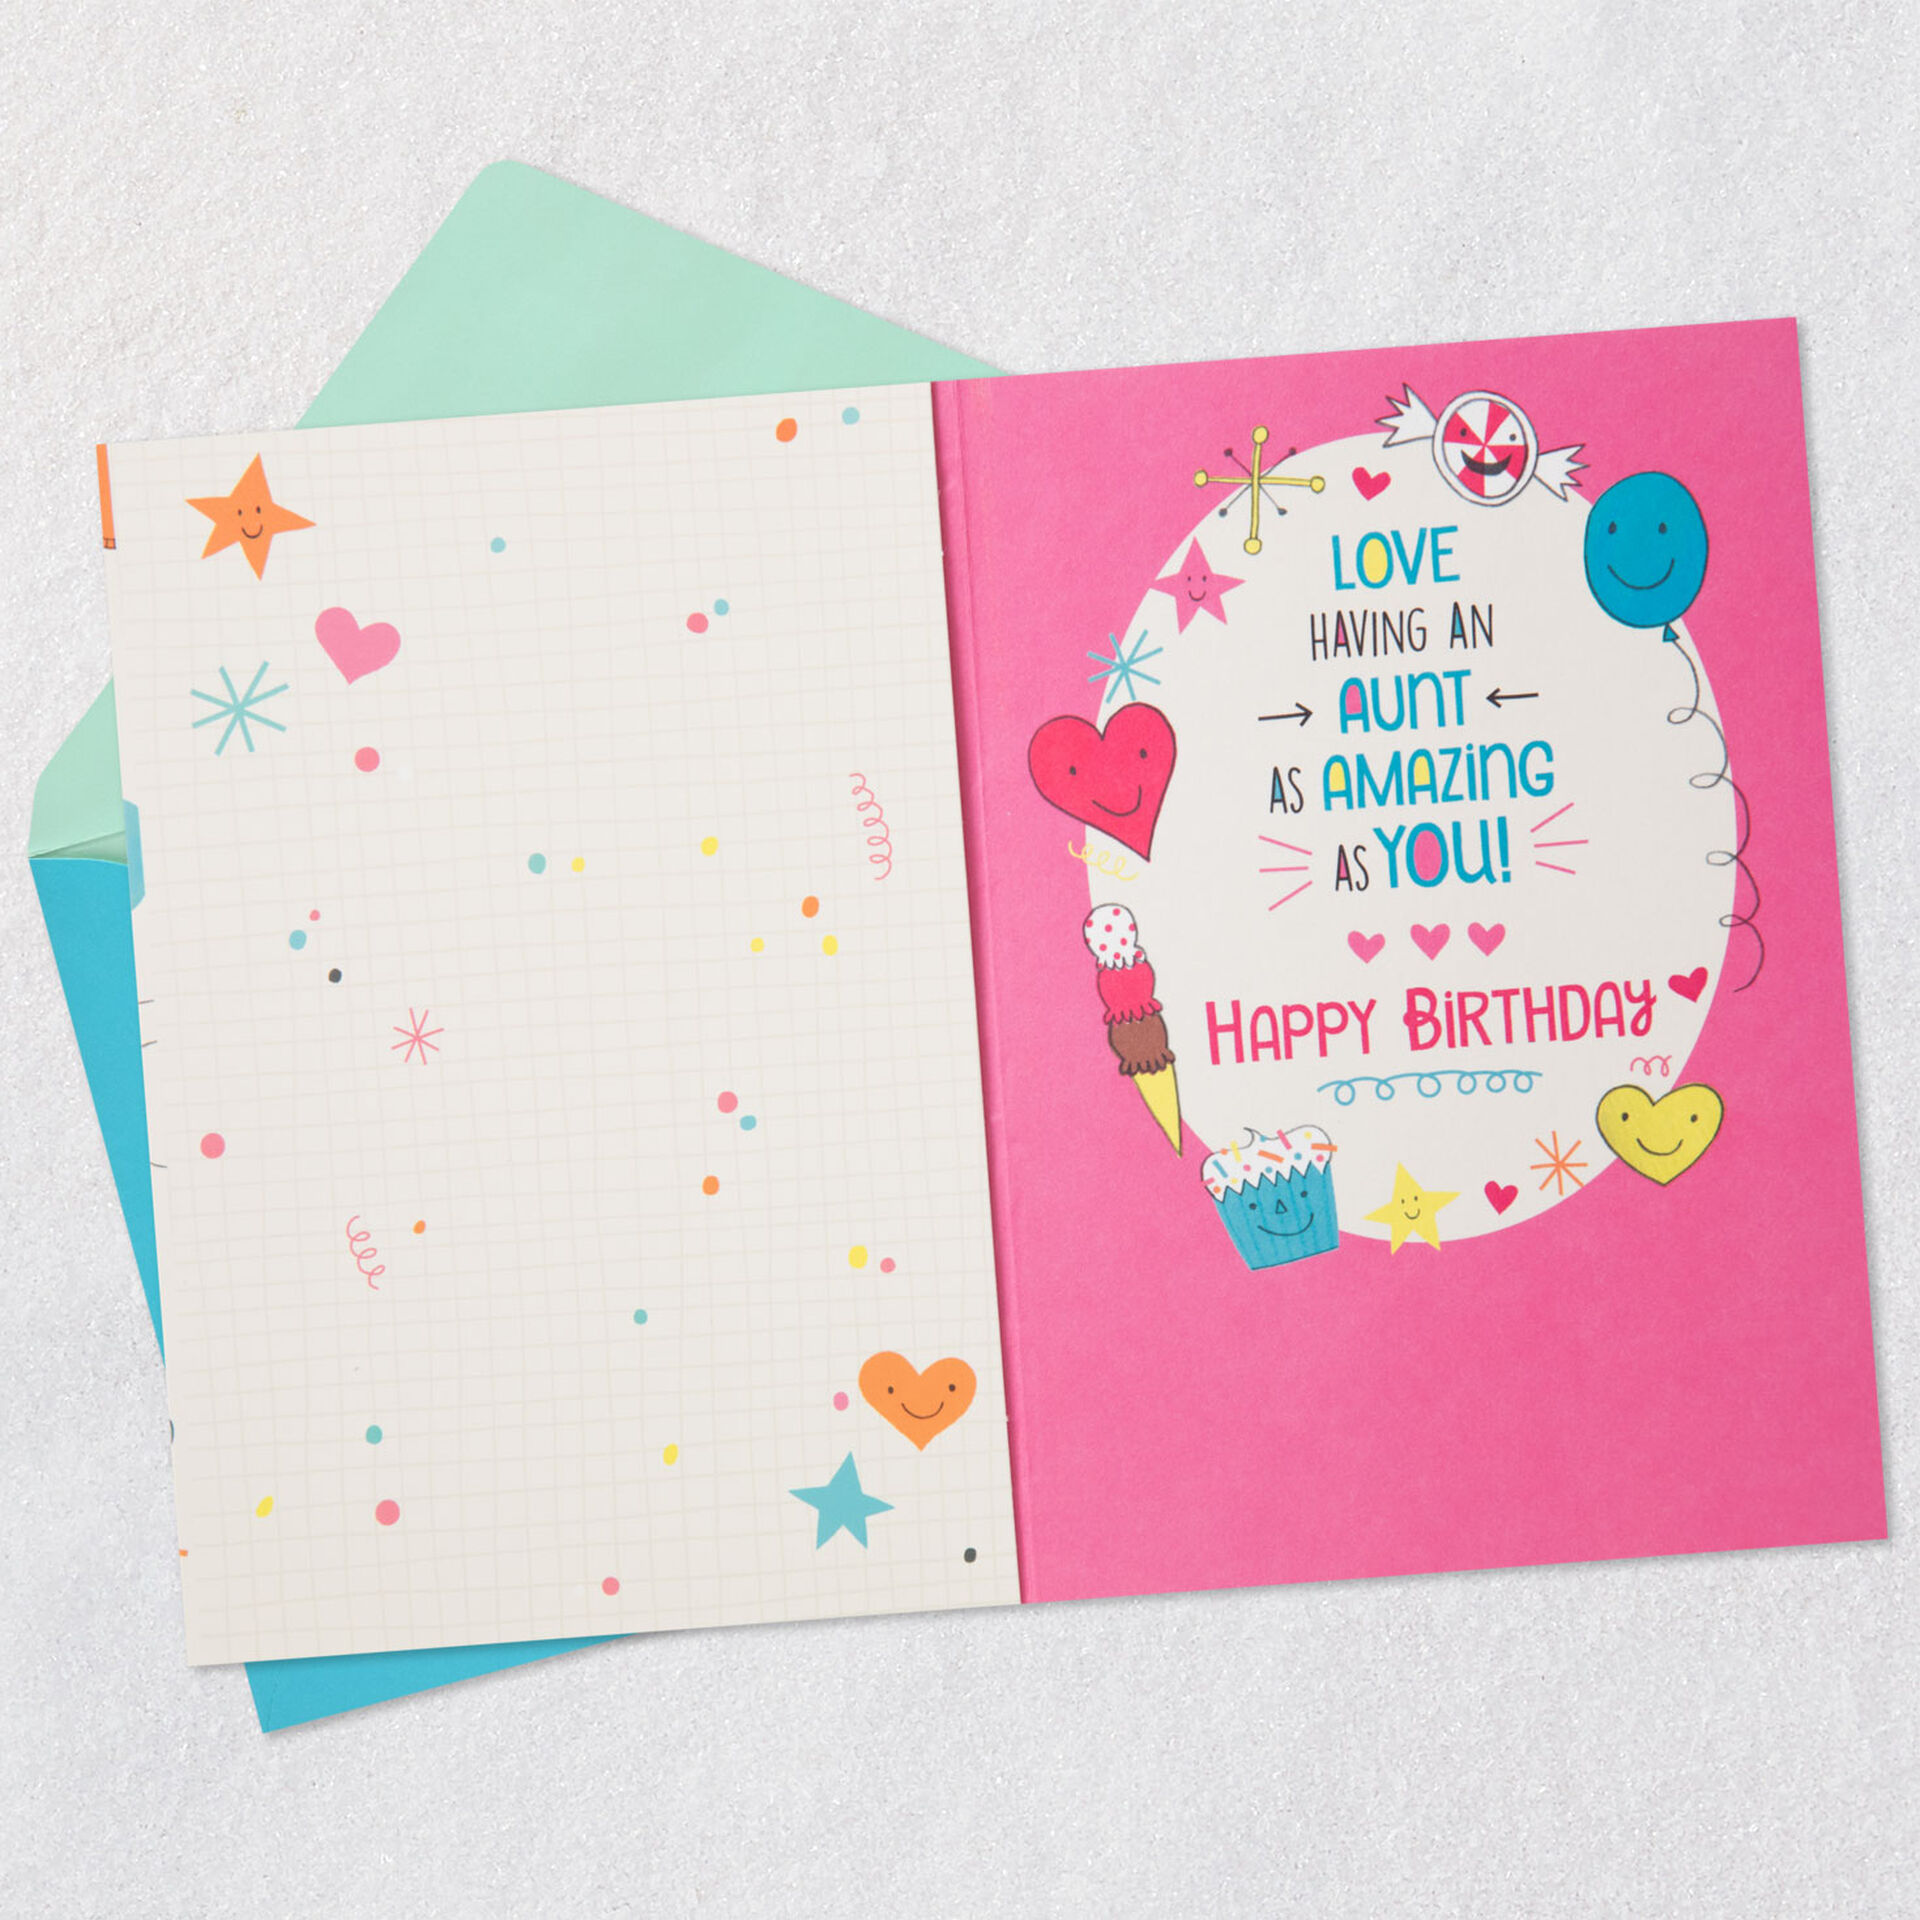 Fun-Icons-Birthday-Card-for-Aunt-From-Kid_299FBD4698_03